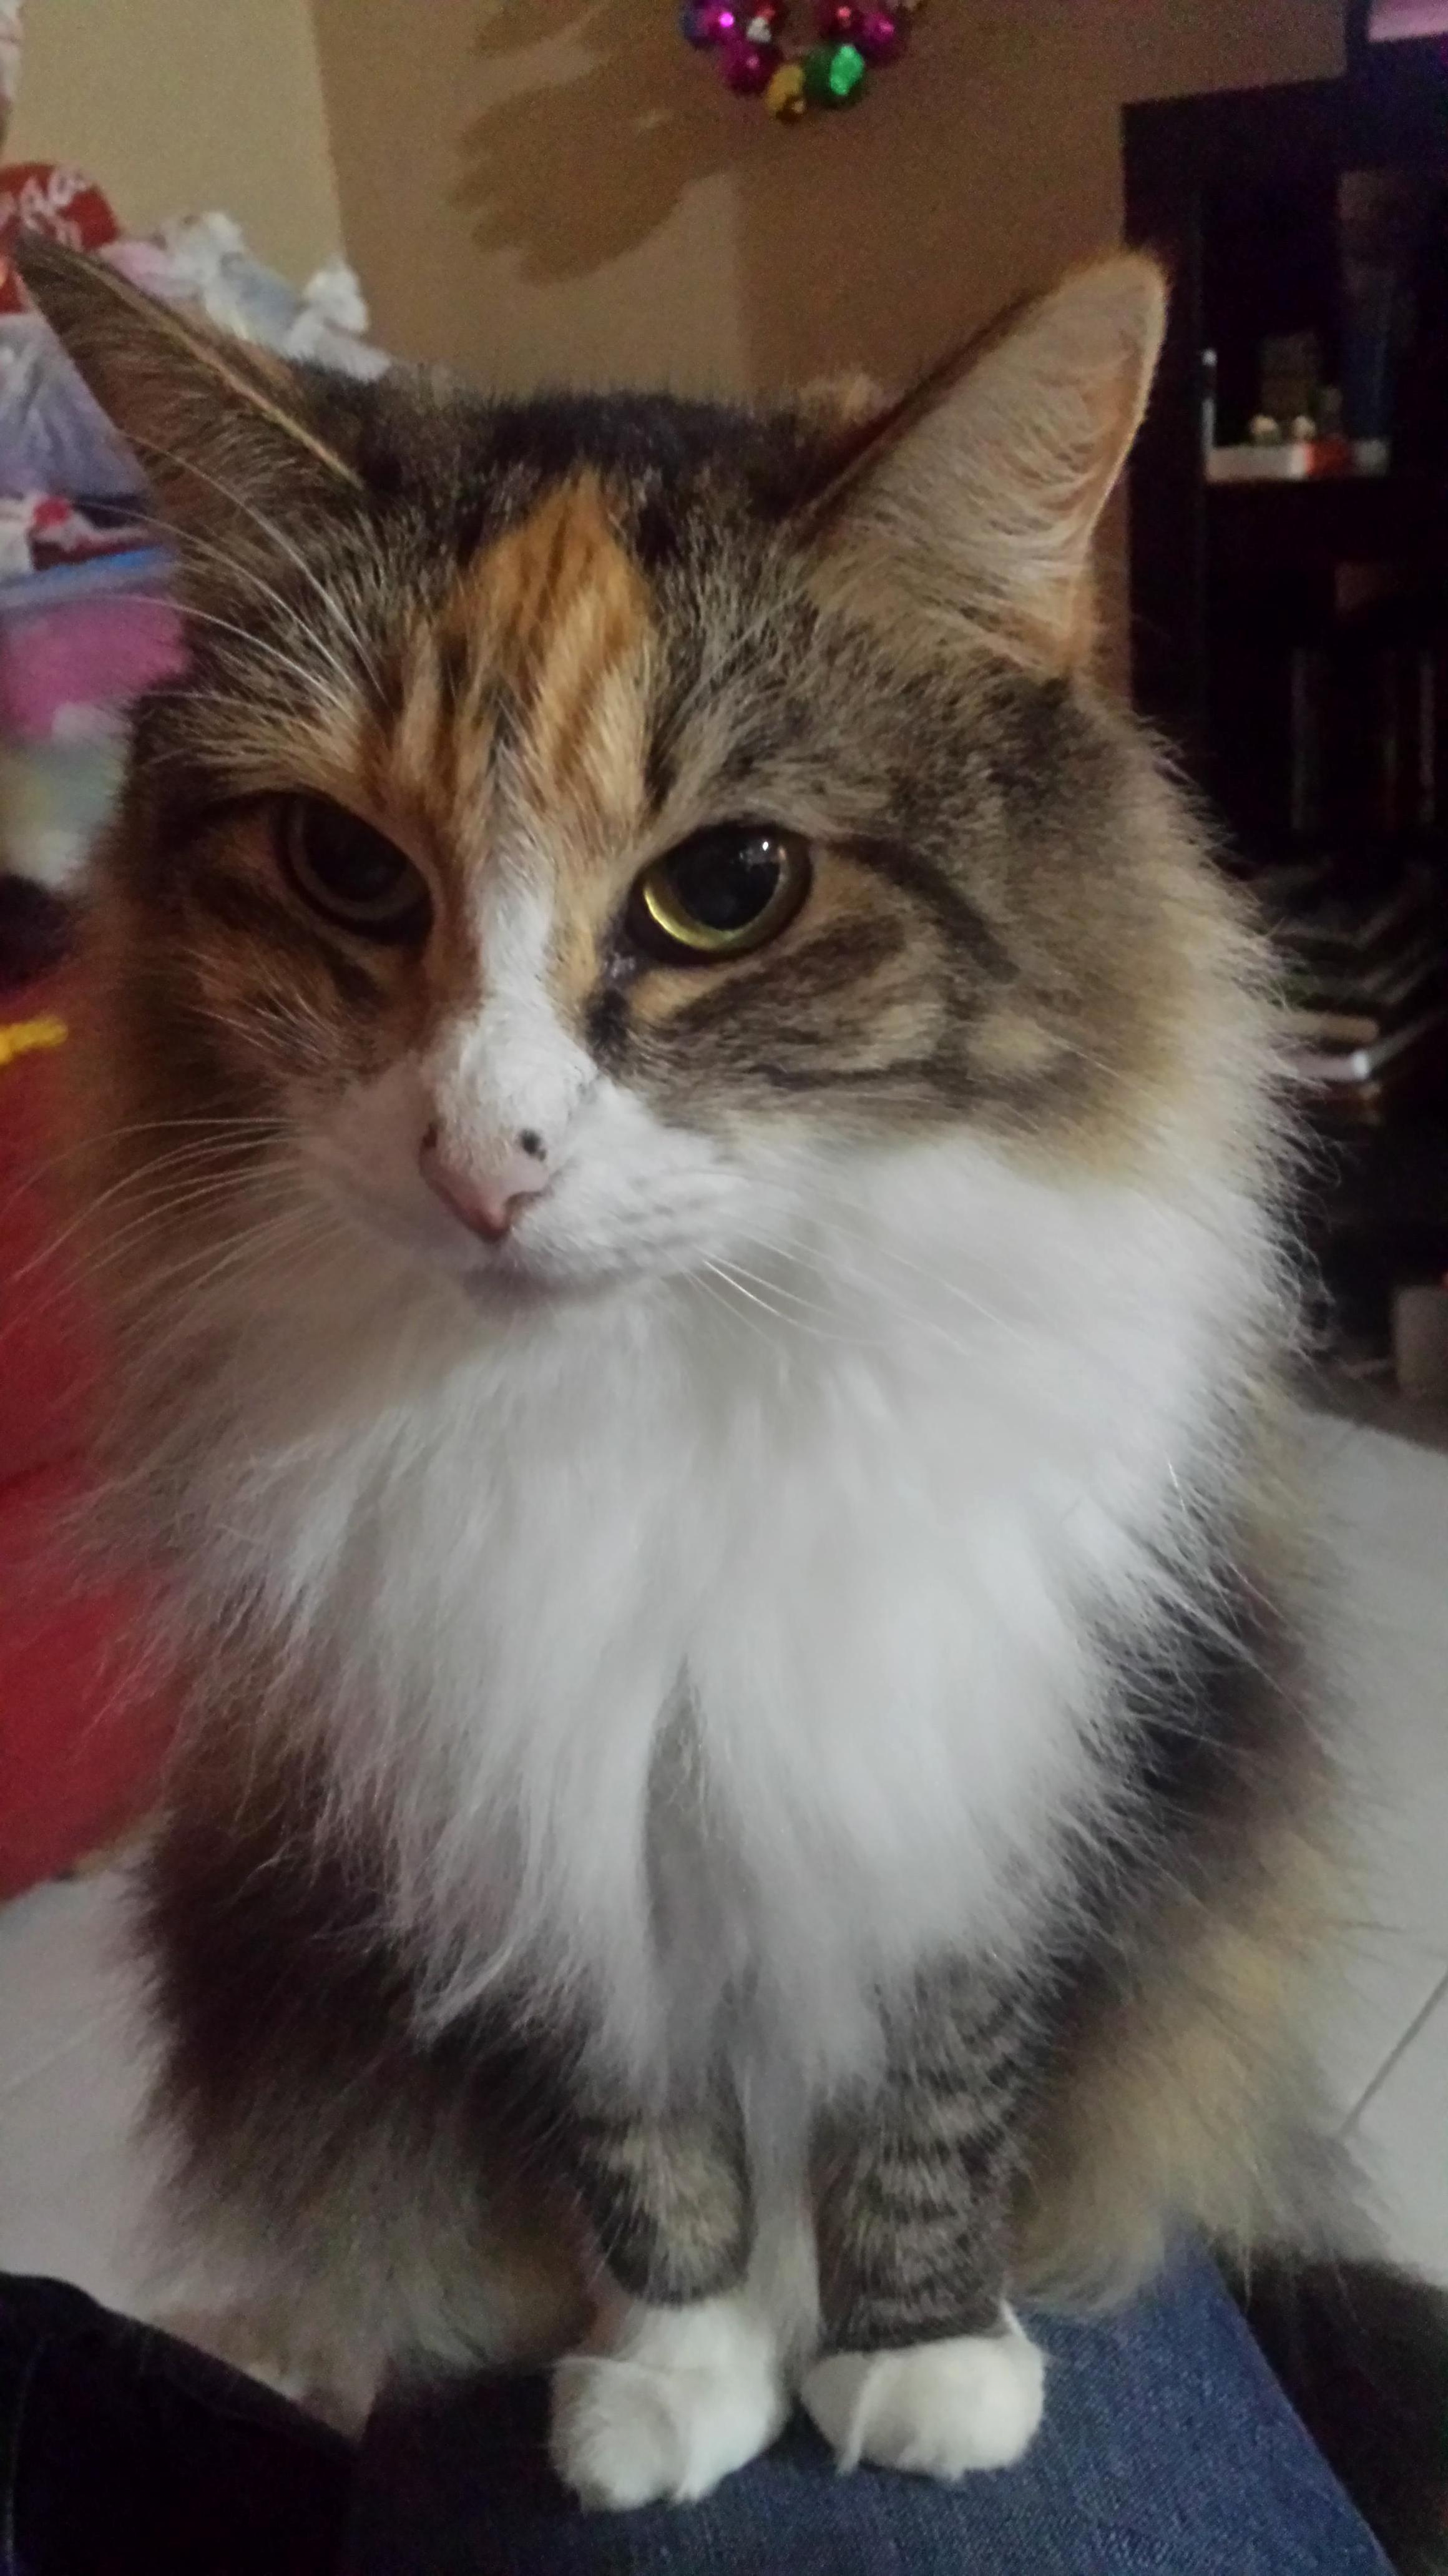 This is my 10 yo cat gordita, shes always that serious